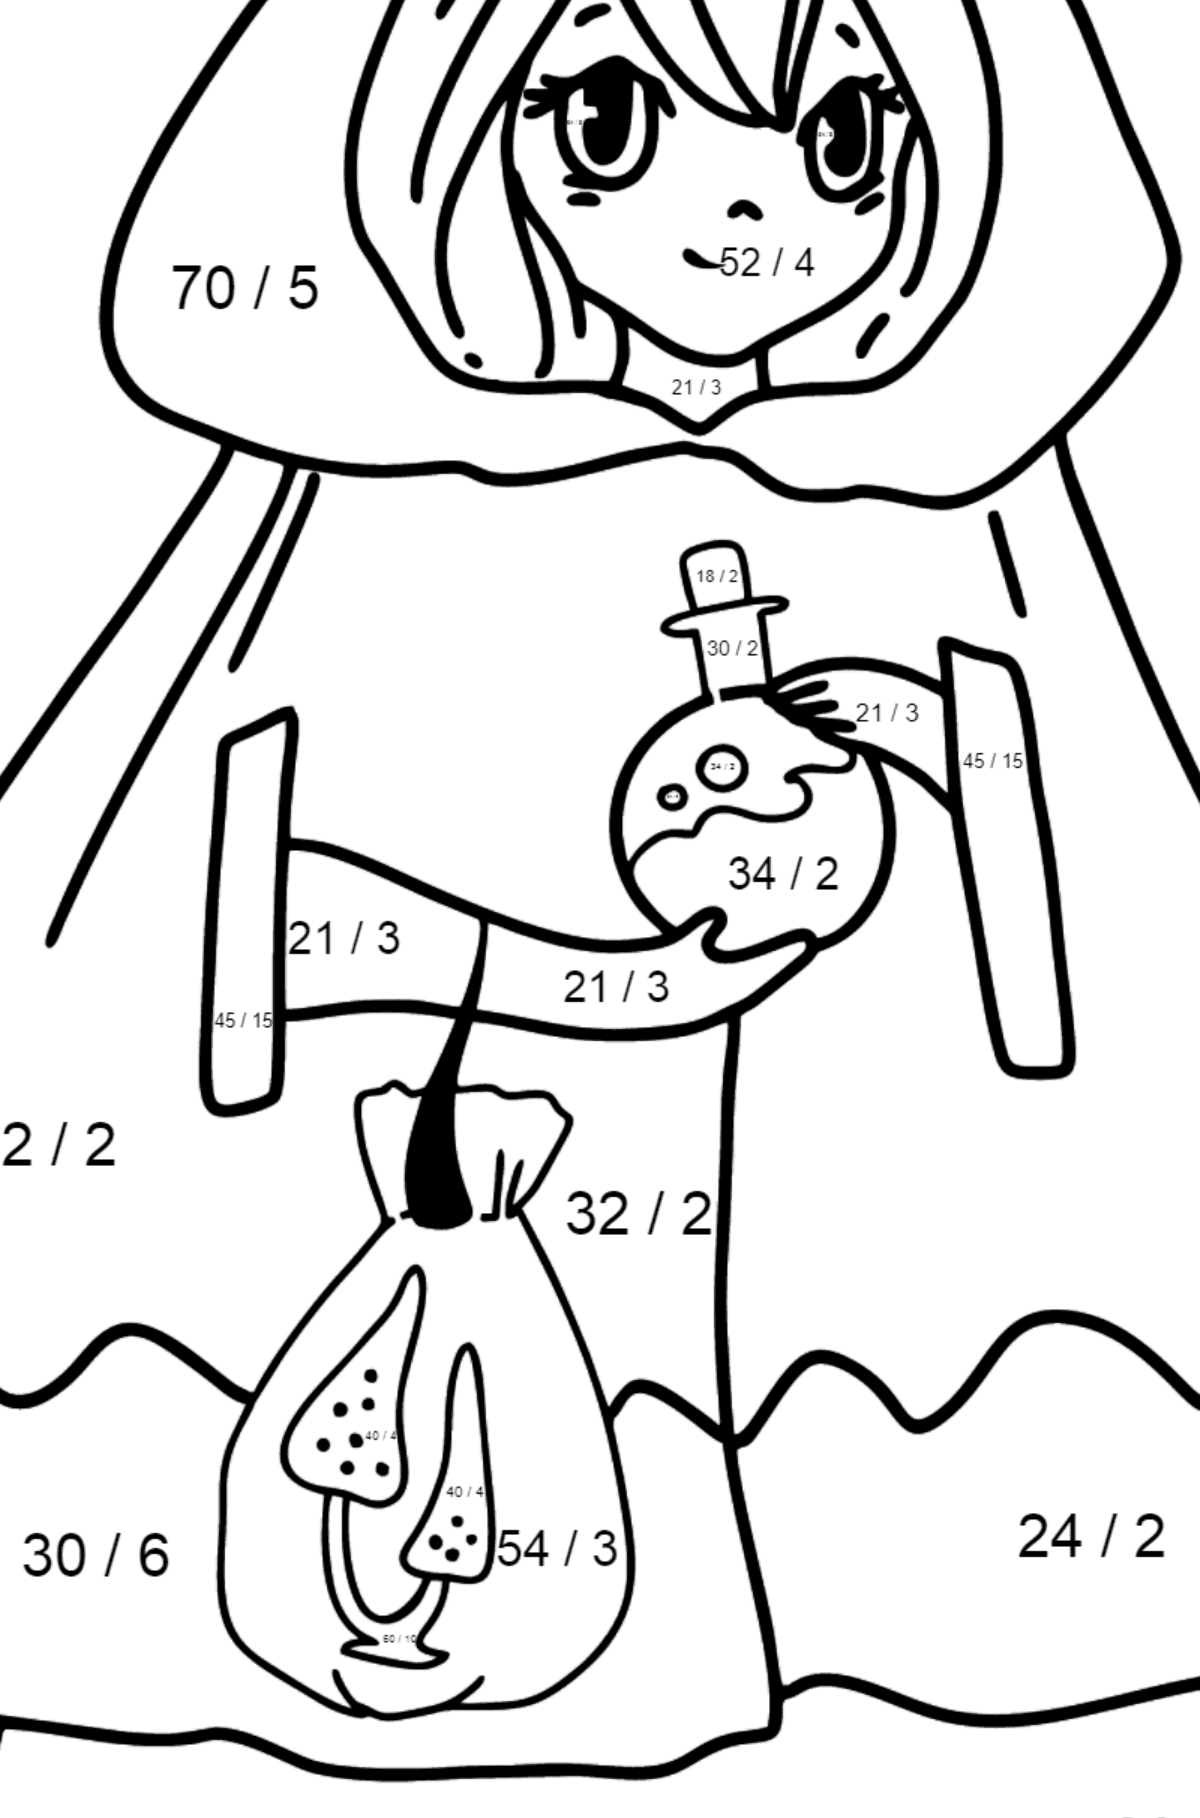 Anime Girl Witch Coloring Pages - Math Coloring - Division for Kids